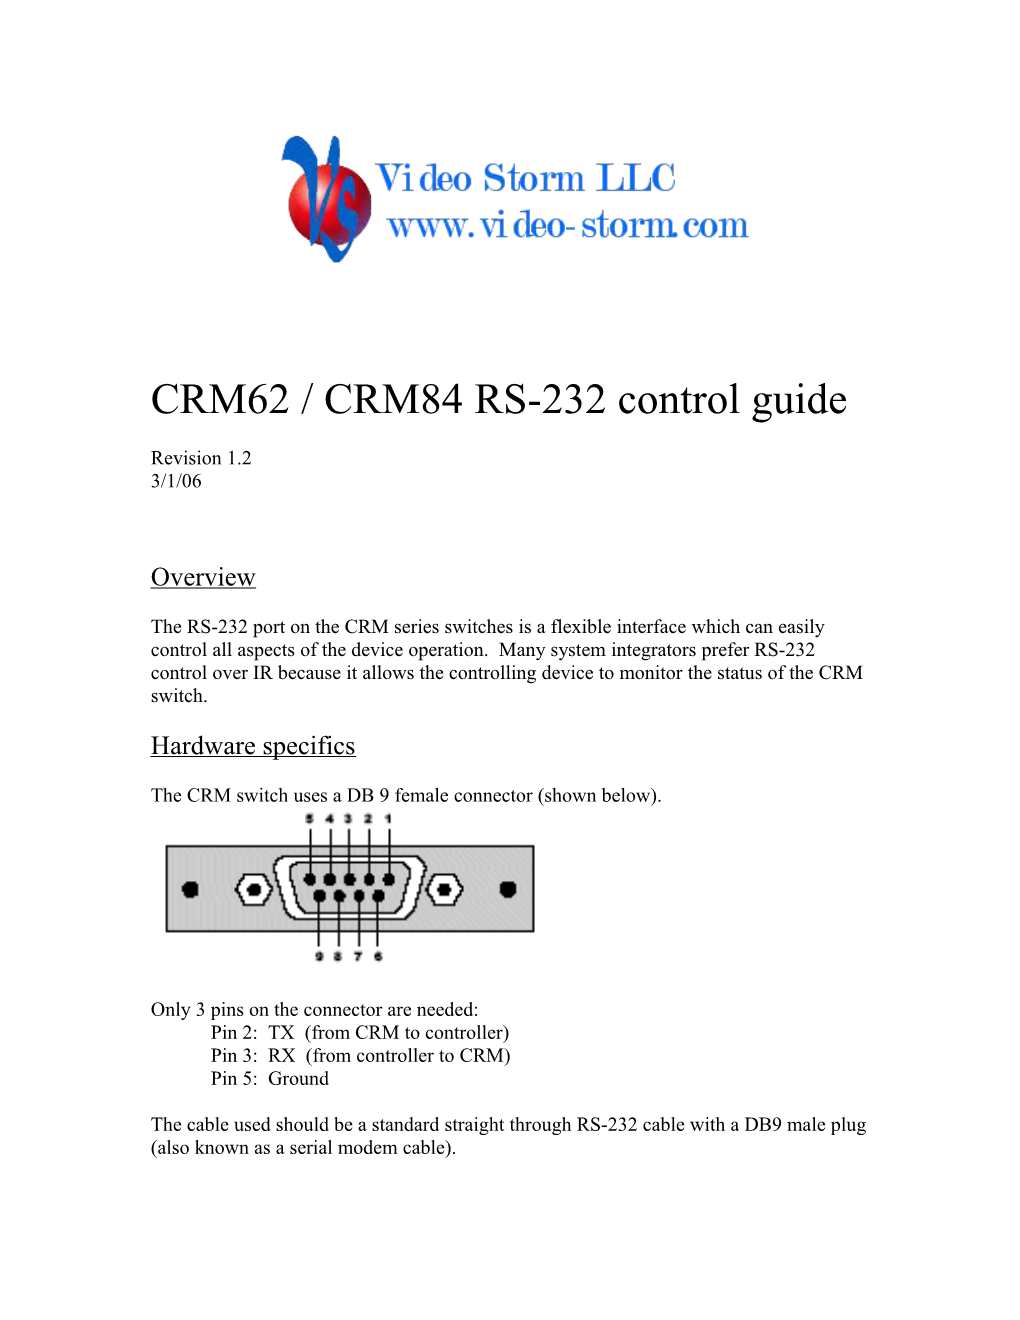 The CRM Switch Uses a DB 9 Female Connector (Shown Below)